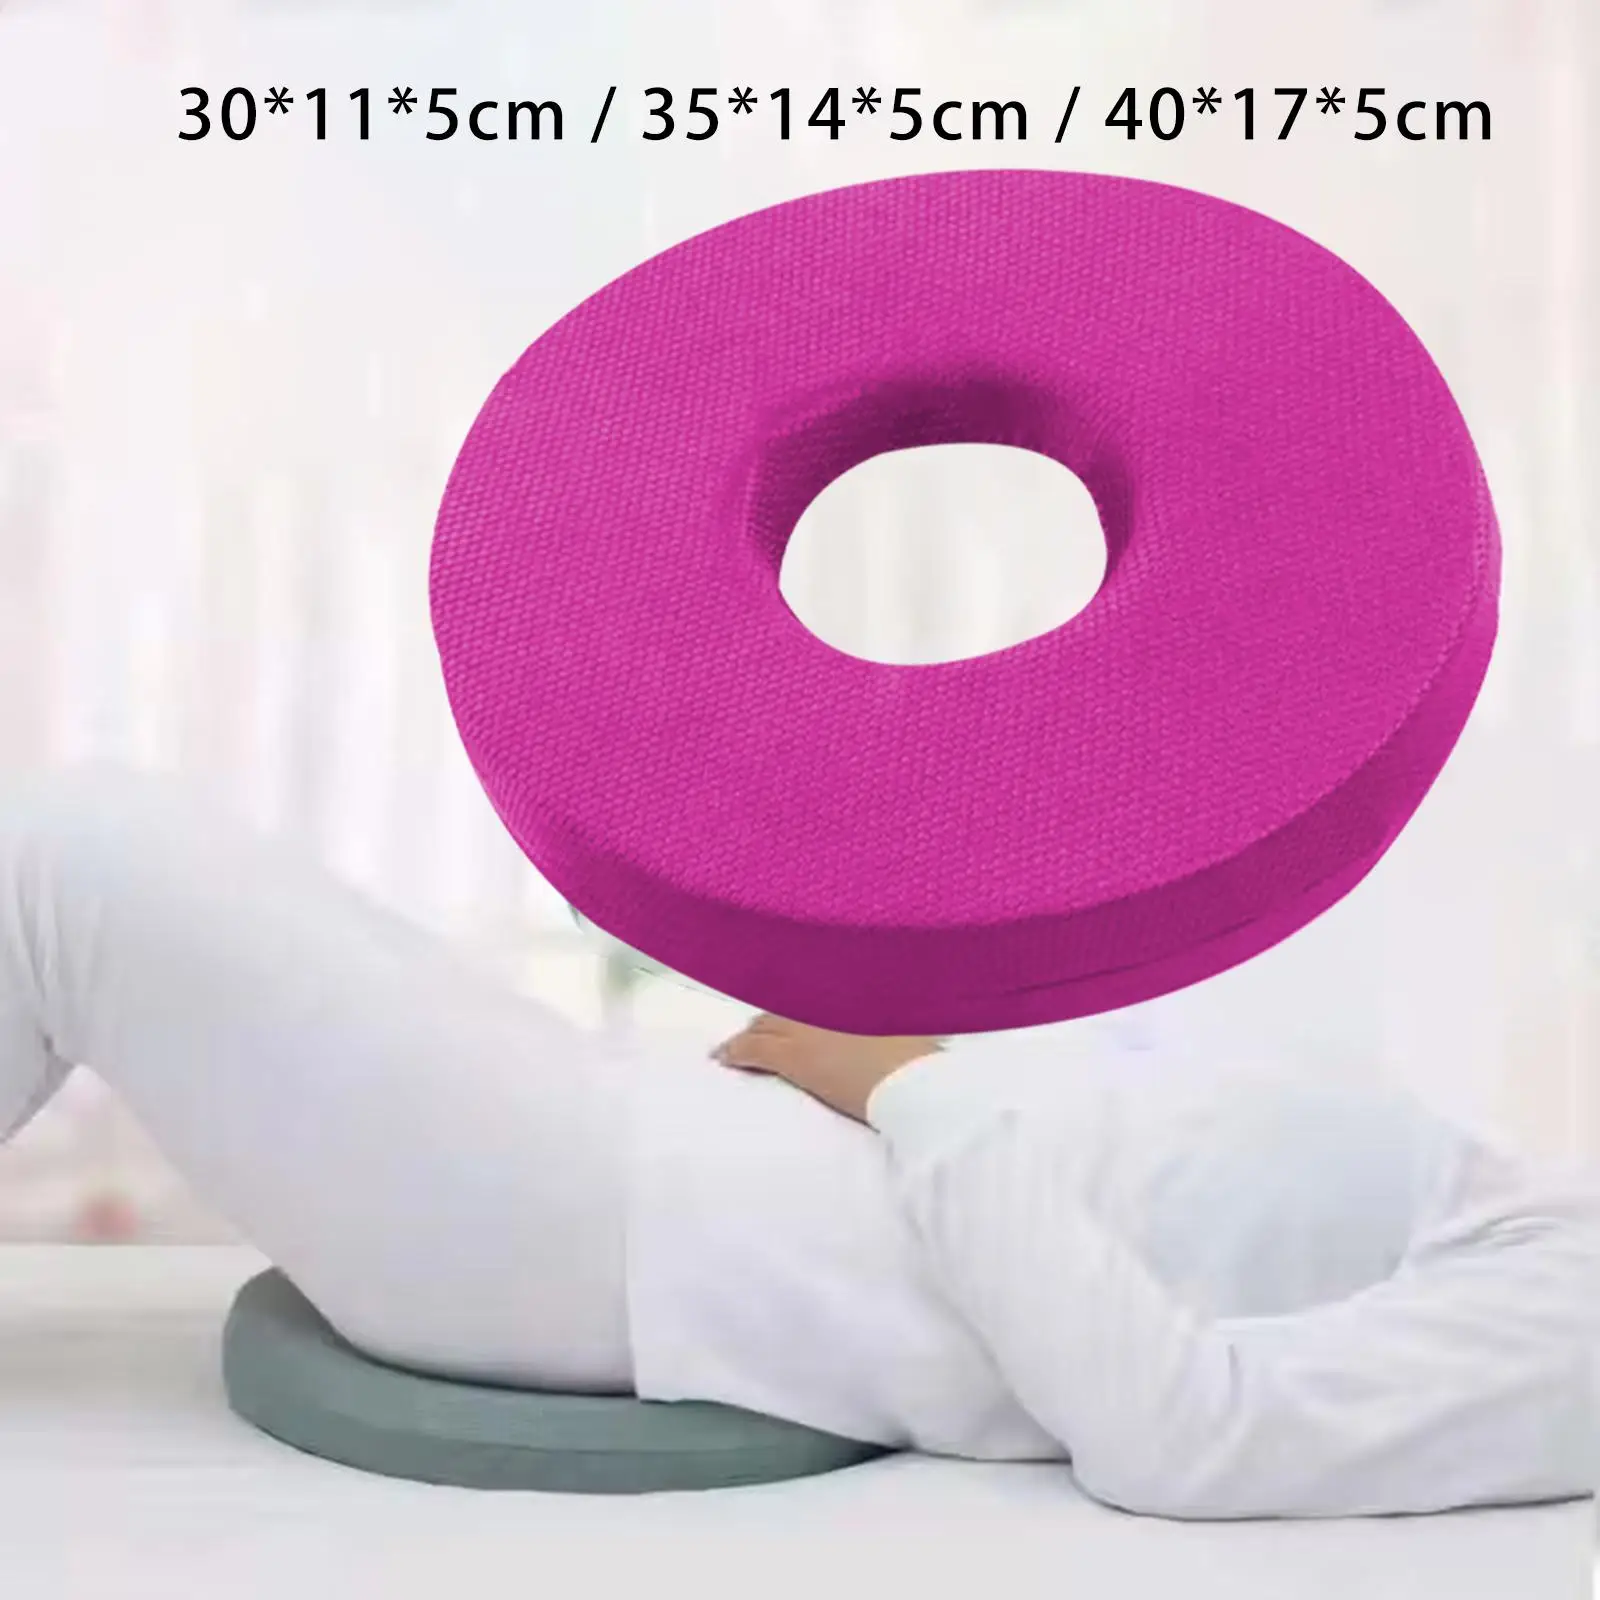 Ergonomic Donut Pillow Reducing Foot Pressure Firm Density Ankle Protector Innovations Cushion for The Elderly